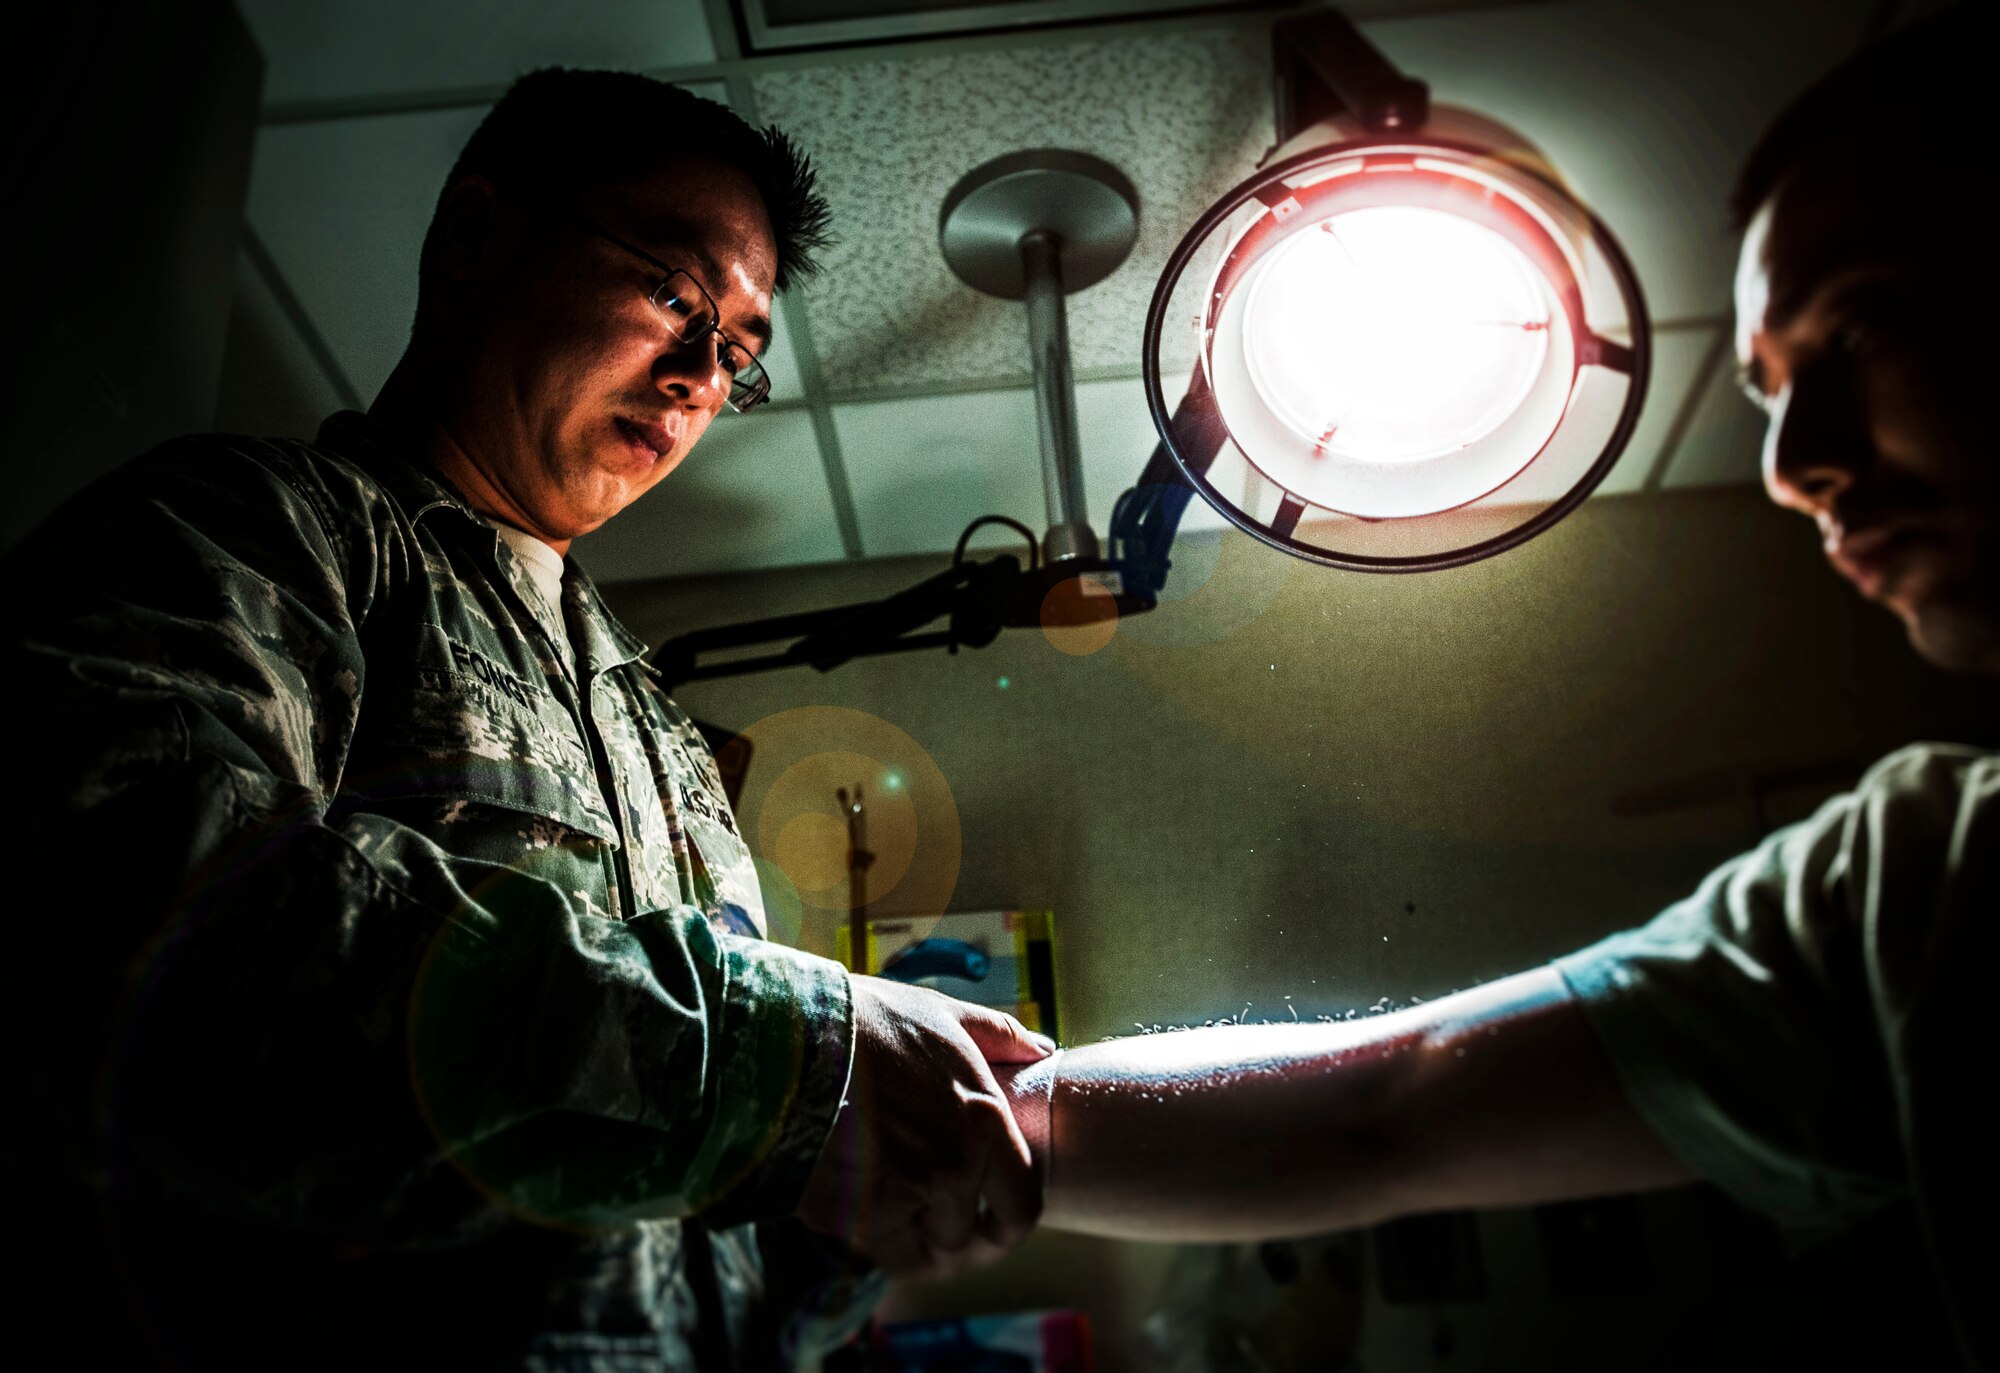 Tech Sgt. Chun Chung Fong, 628th Medical Group Primary Care Flight, flight chief, demonstrates a routine exam on an Airman at Joint Base Charleston – Air Base, Feb. 12, 2013. The IDMTs’ mission is to save lives while accomplishing various jobs. They provide and manage patient care while at home station. (U.S. Air Force photo / Airman 1st Class Tom Brading)